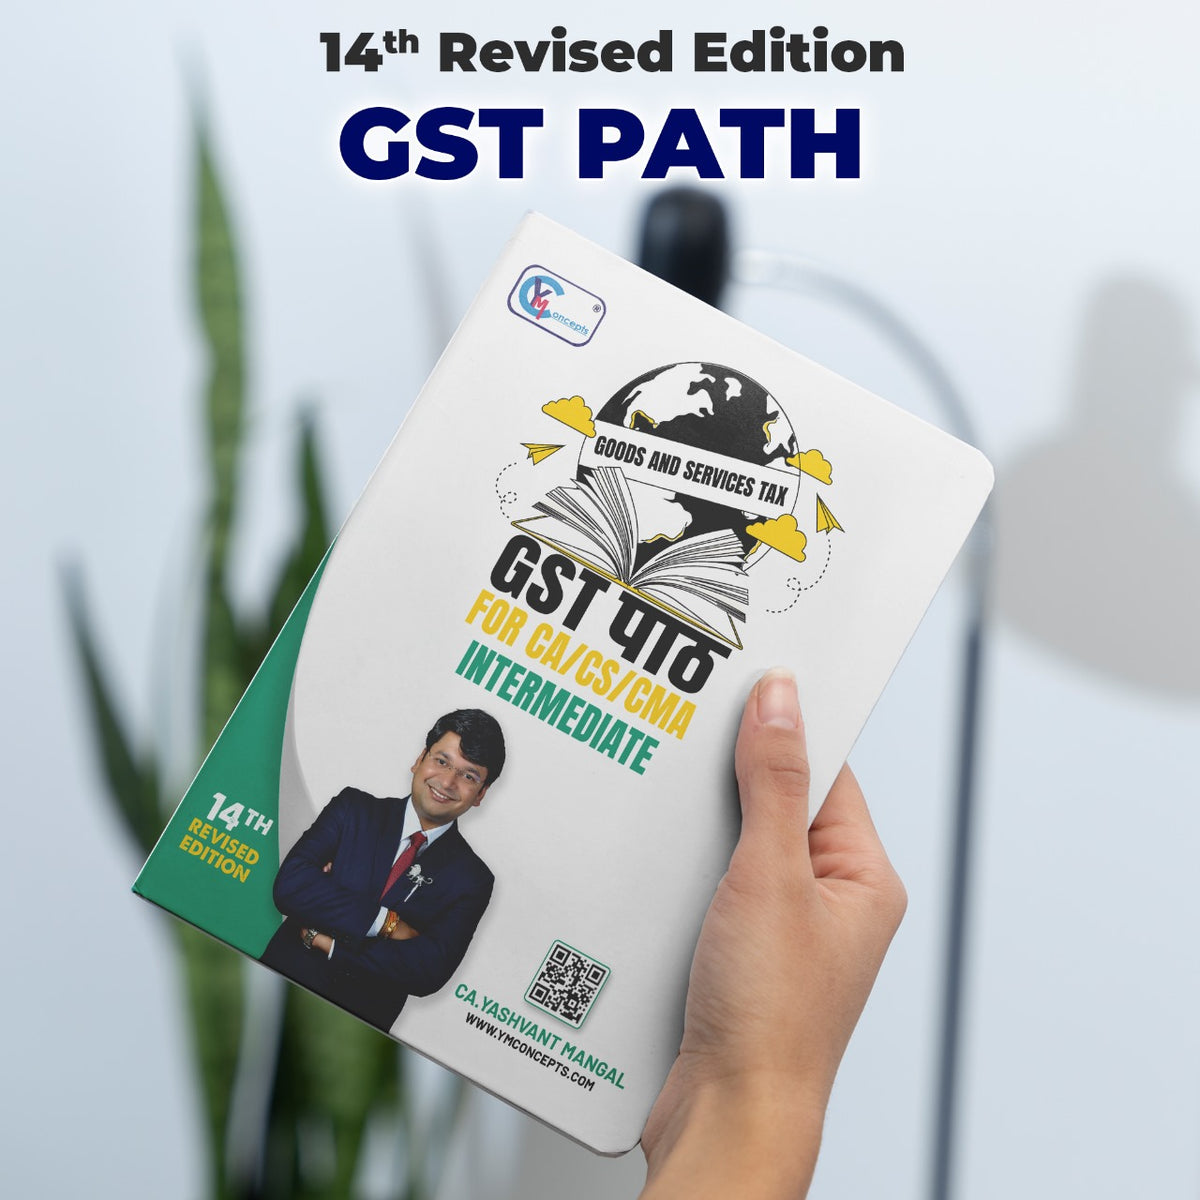 CA INTER - GST पाठ - A Conceptual Learning Book - By CA. Yashvant Mangal Sep. 24 / Jan. 25